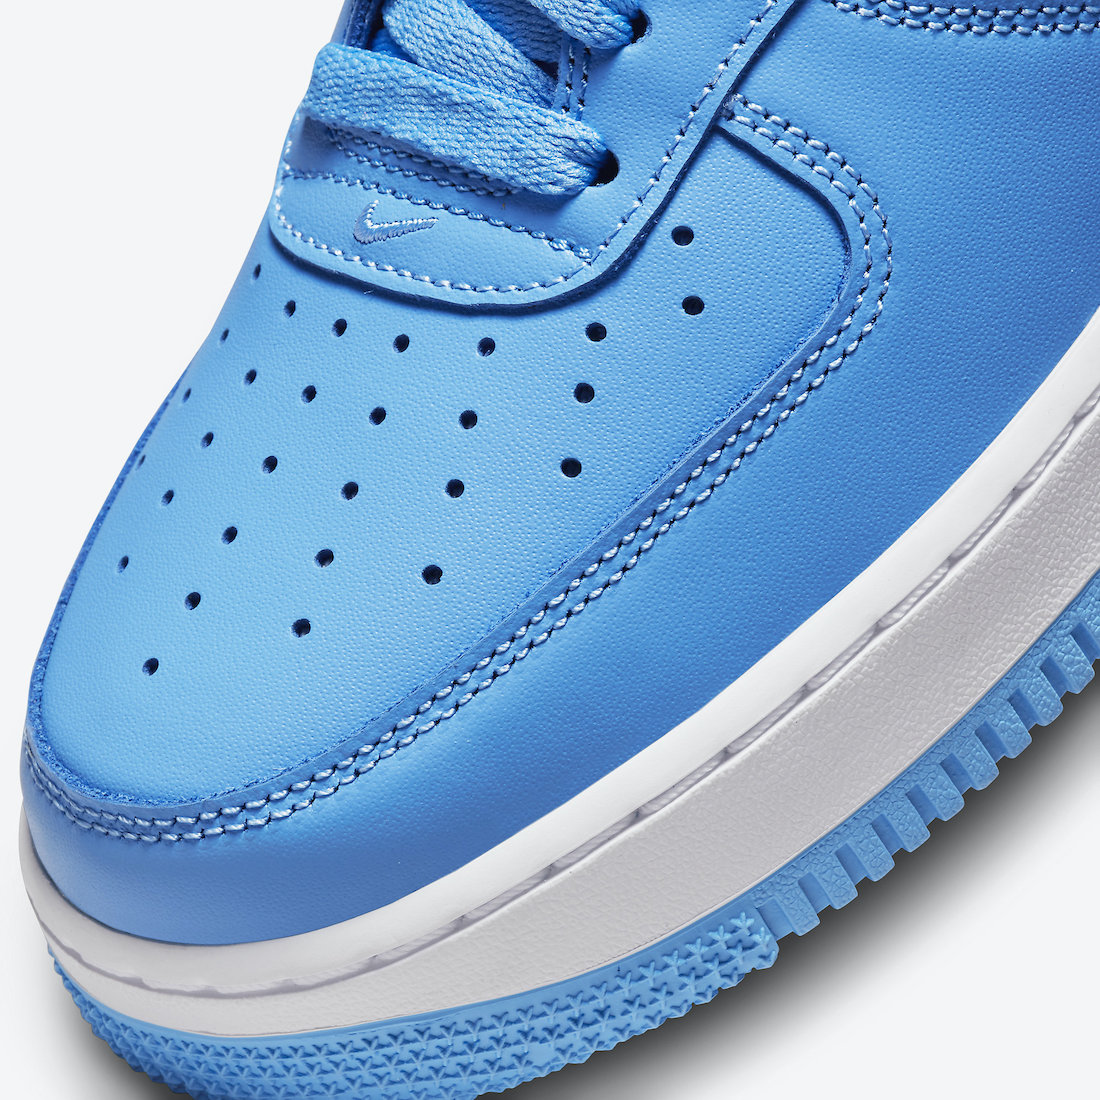 Nike Air Force 1 Low Powder Blue DC2911-400 Release Date